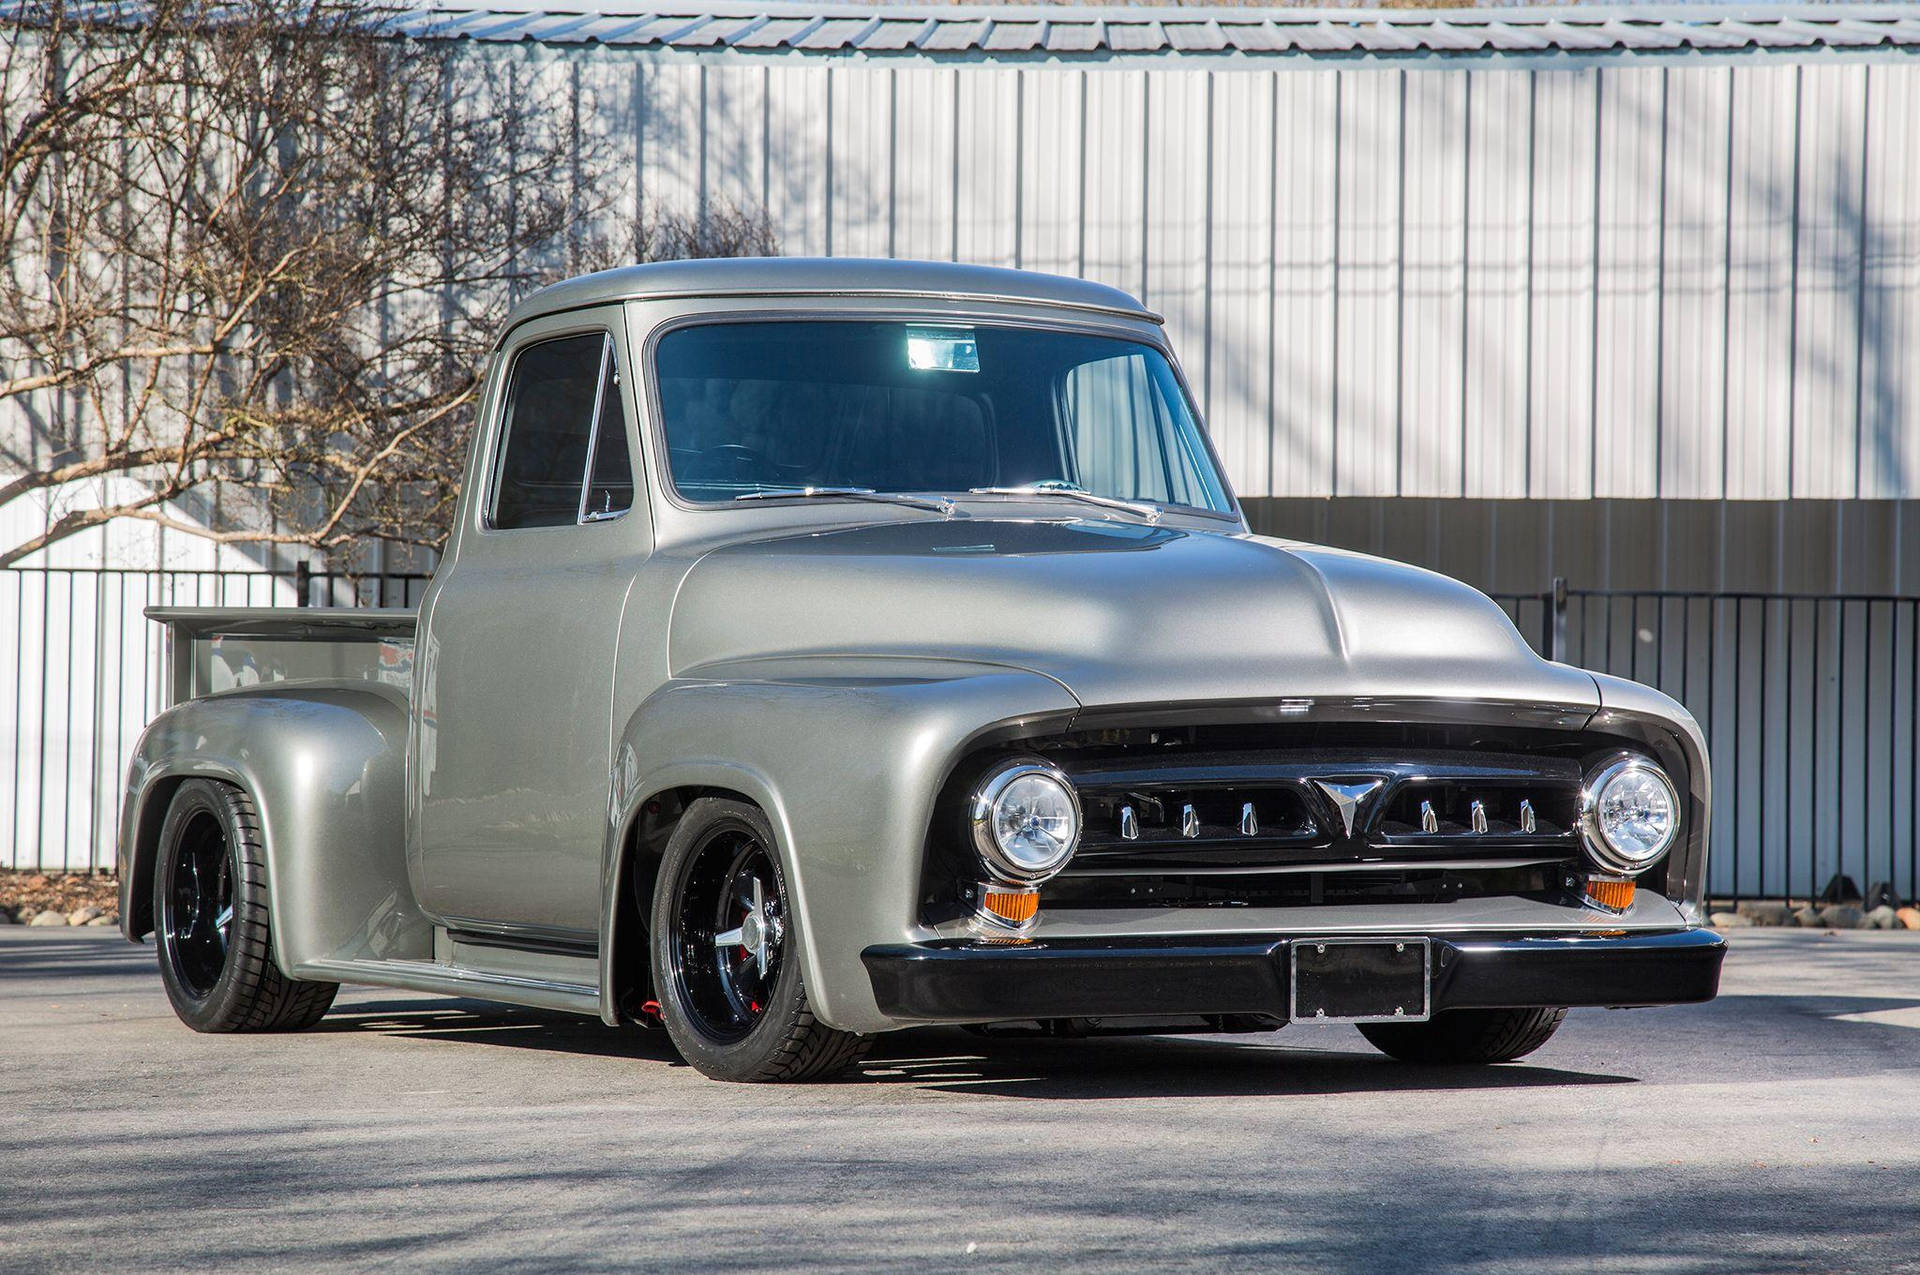 Glossy Gray Old Ford Truck